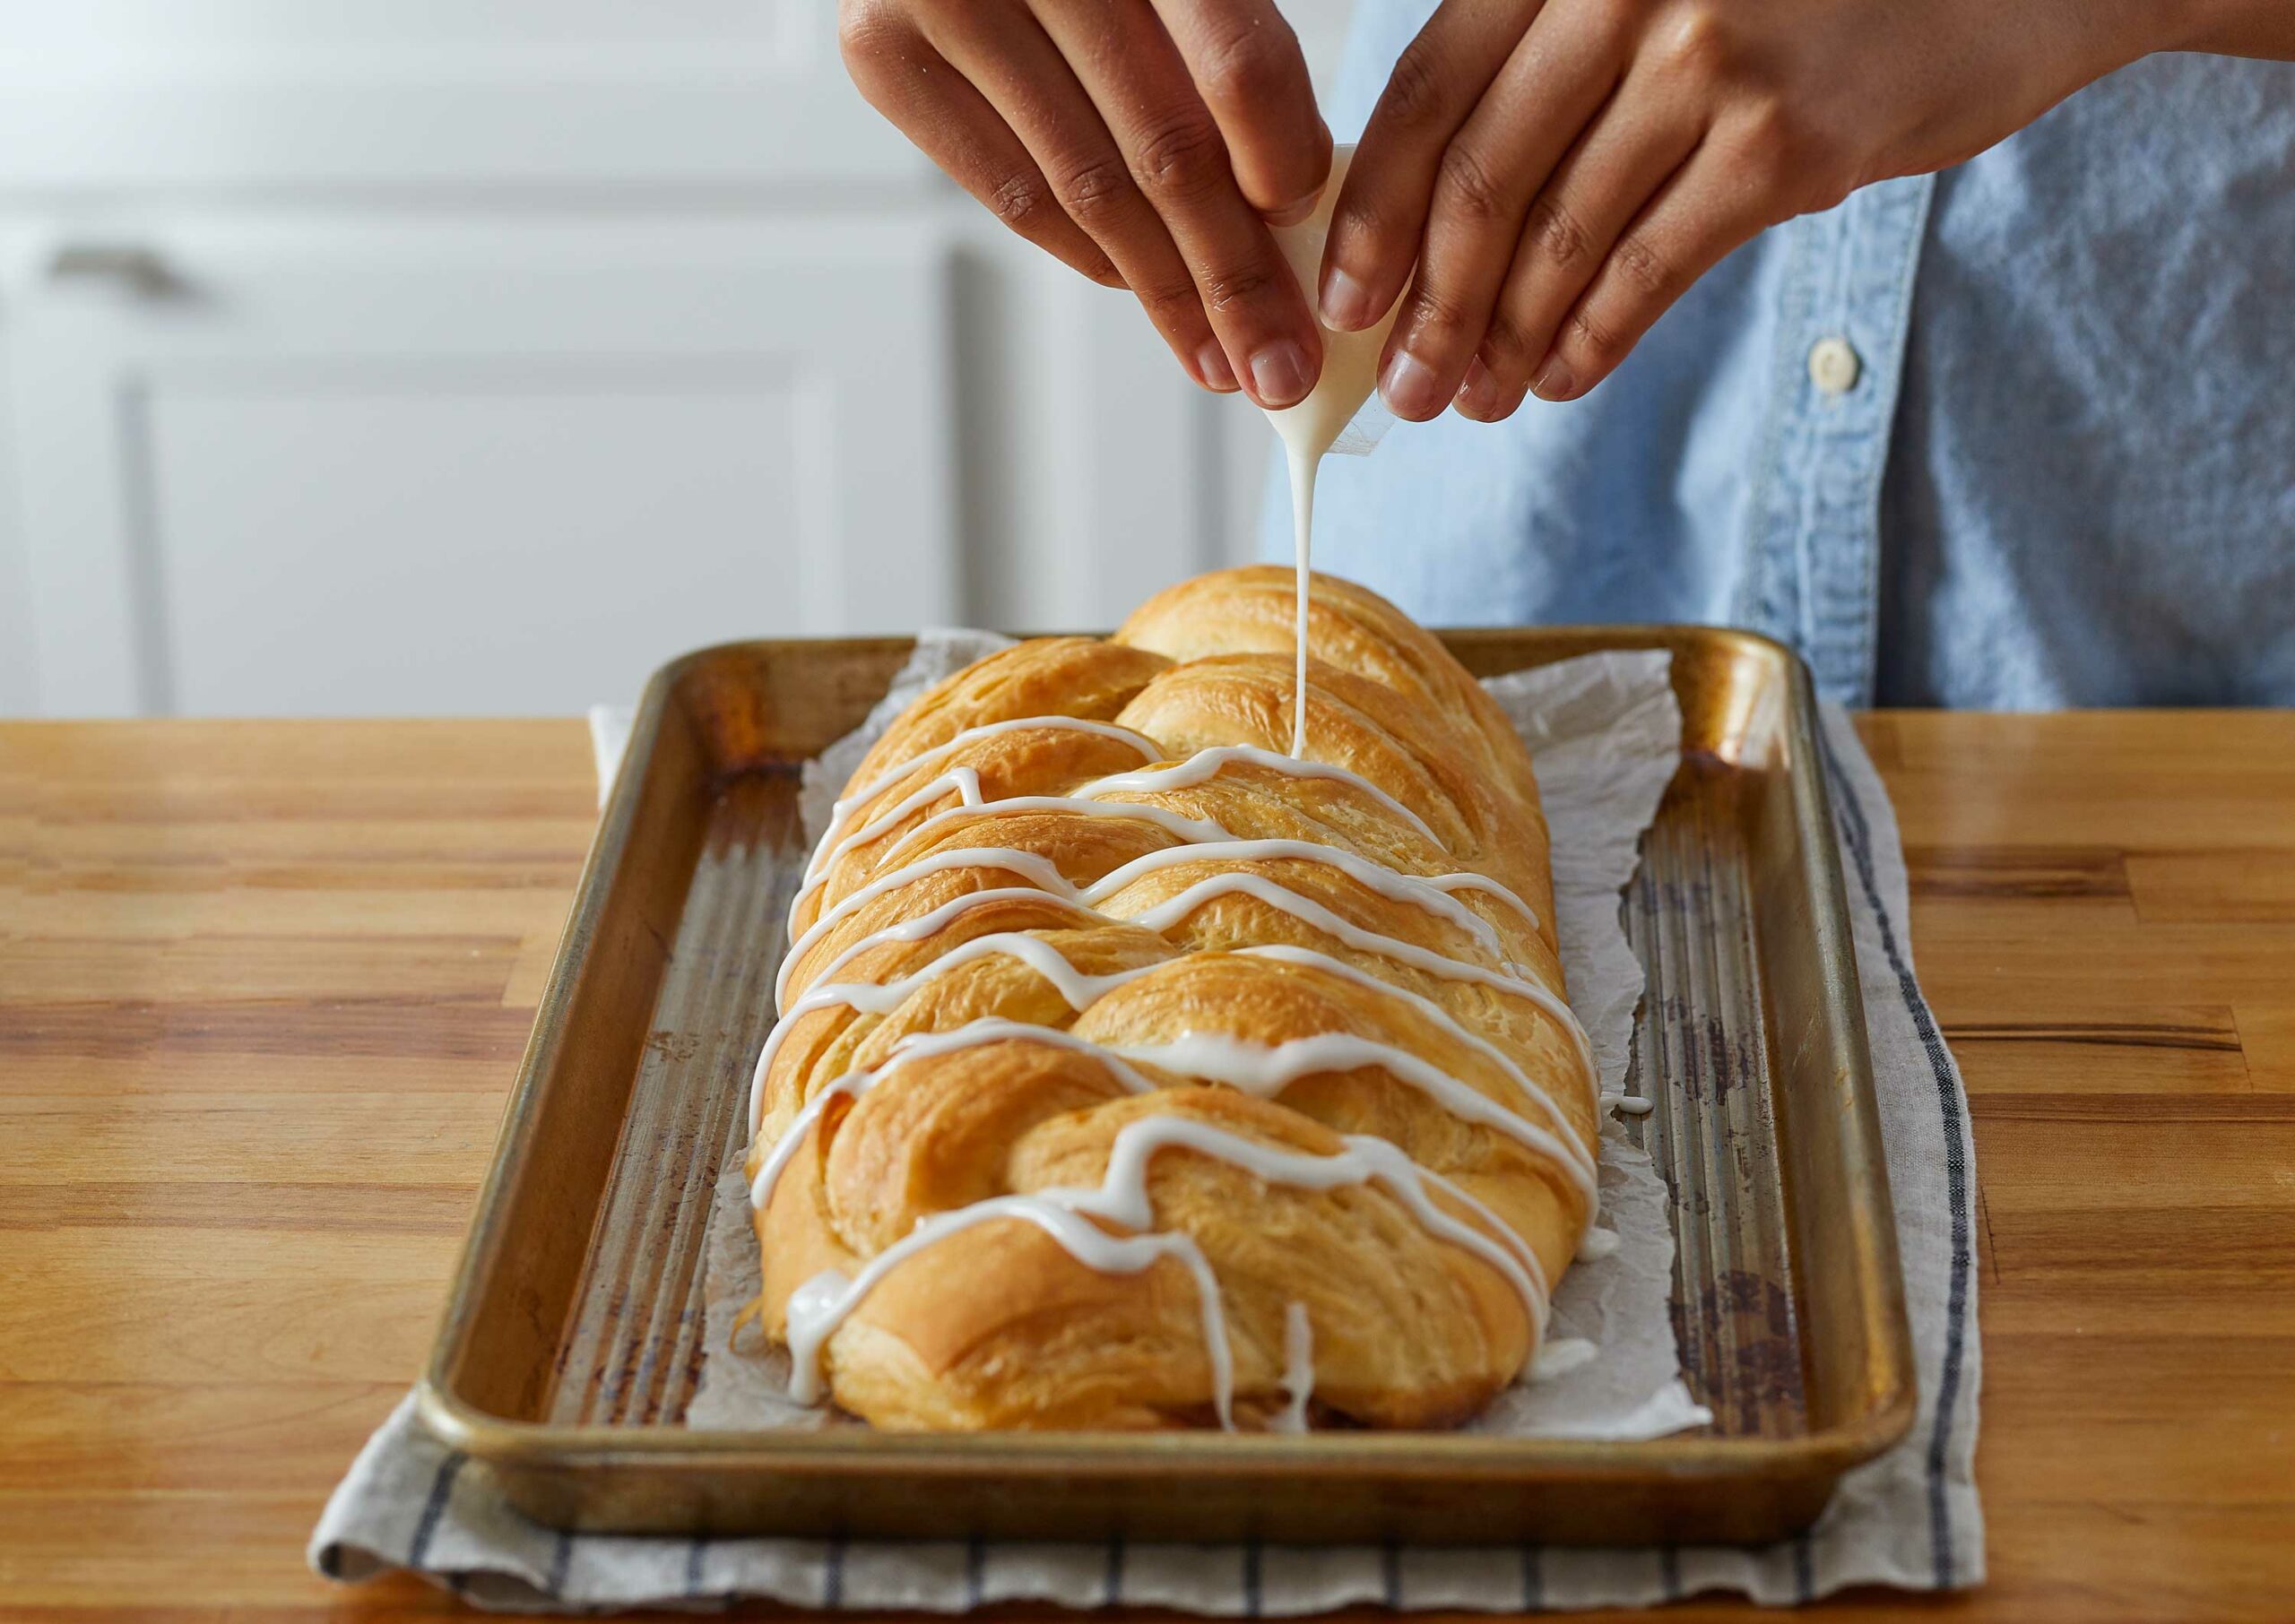 Woman drizzling icing on a cooked Butter Braid Pastry that is sitting on a baking pan.